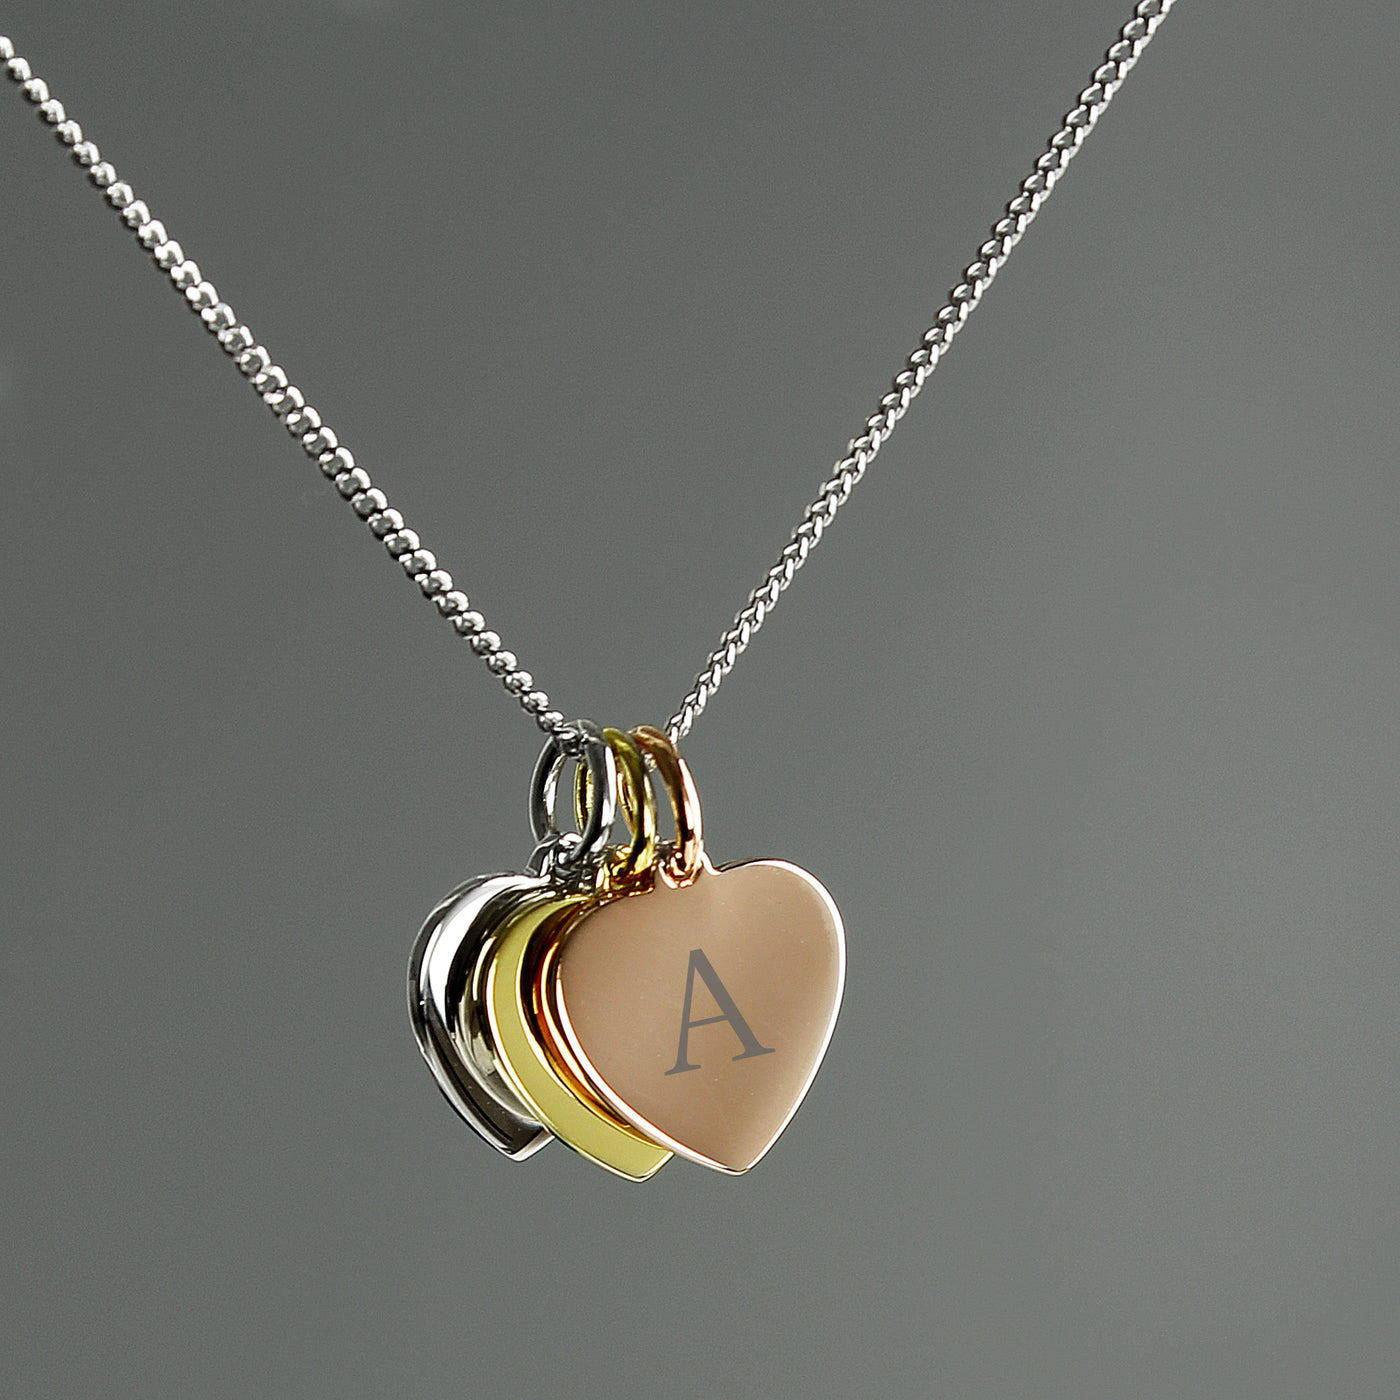 Personalised Gold, Rose Gold and Sterling Silver 3 Hearts Initial Necklace - Shop Personalised Gifts